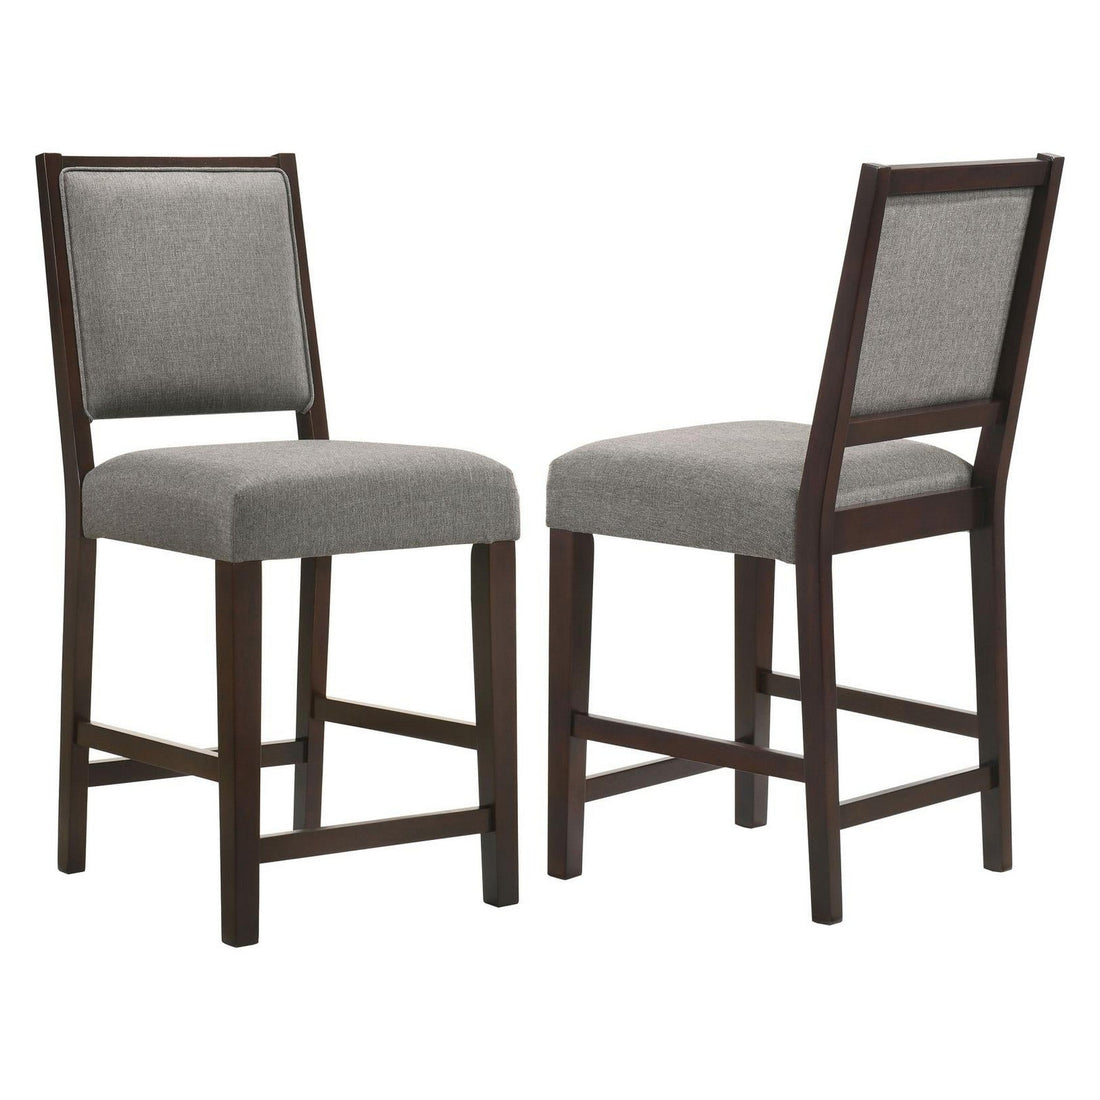 Bedford Upholstered Open Back Counter Height Stools with Footrest (Set of 2) Grey and Espresso 183471